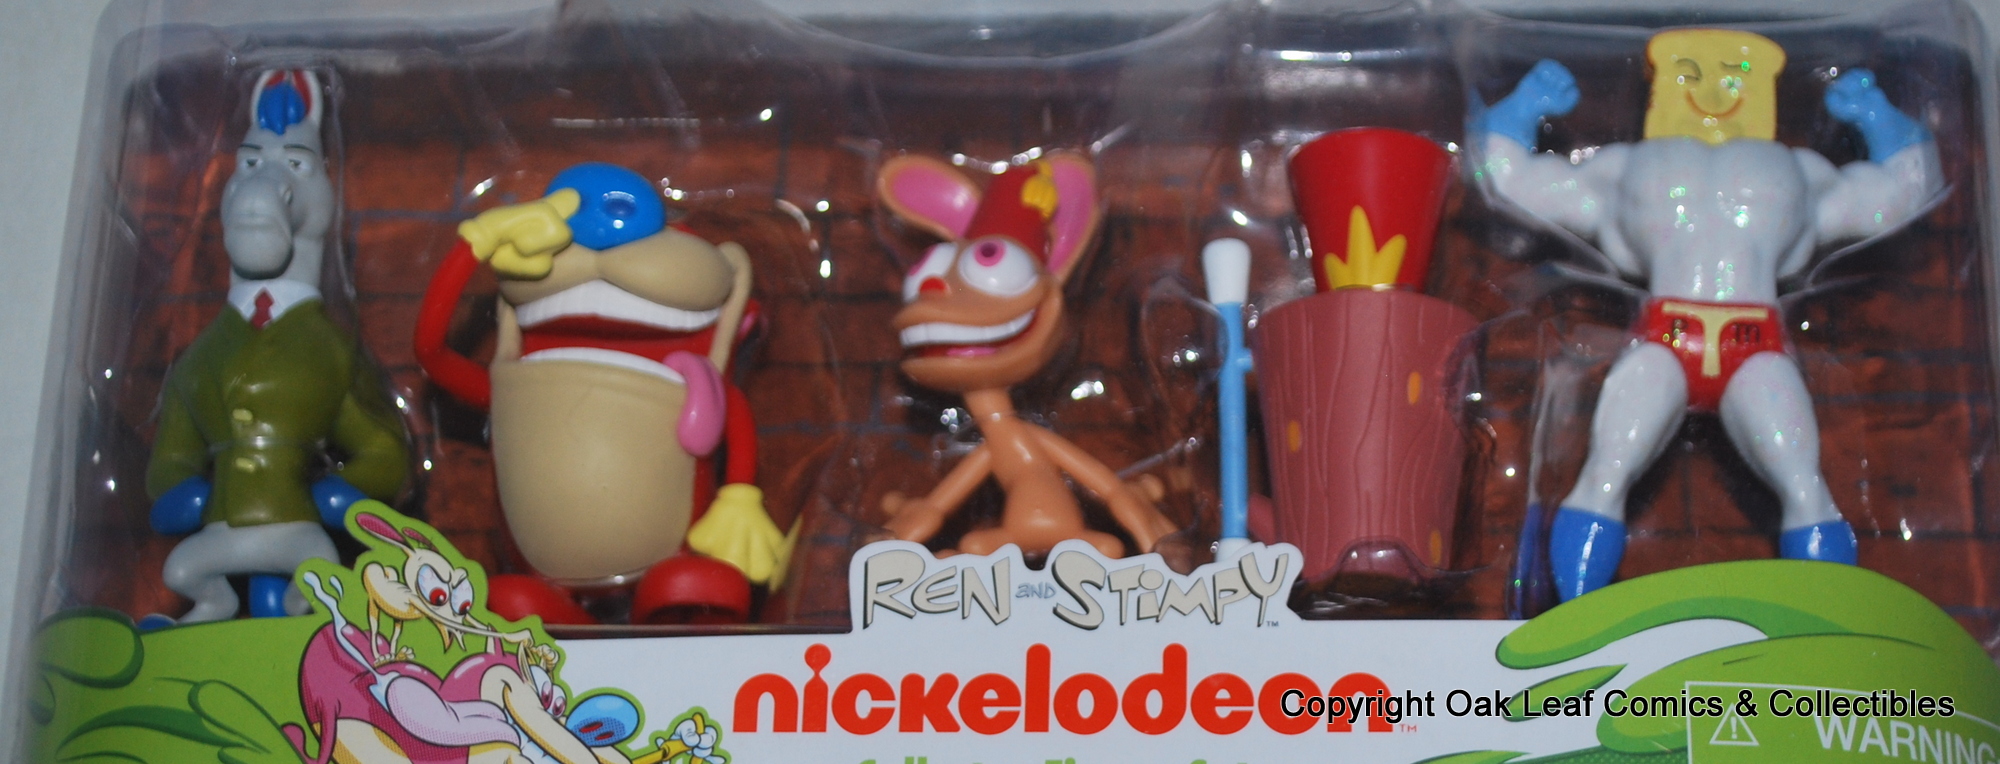 justplay ren and stimpy 2a